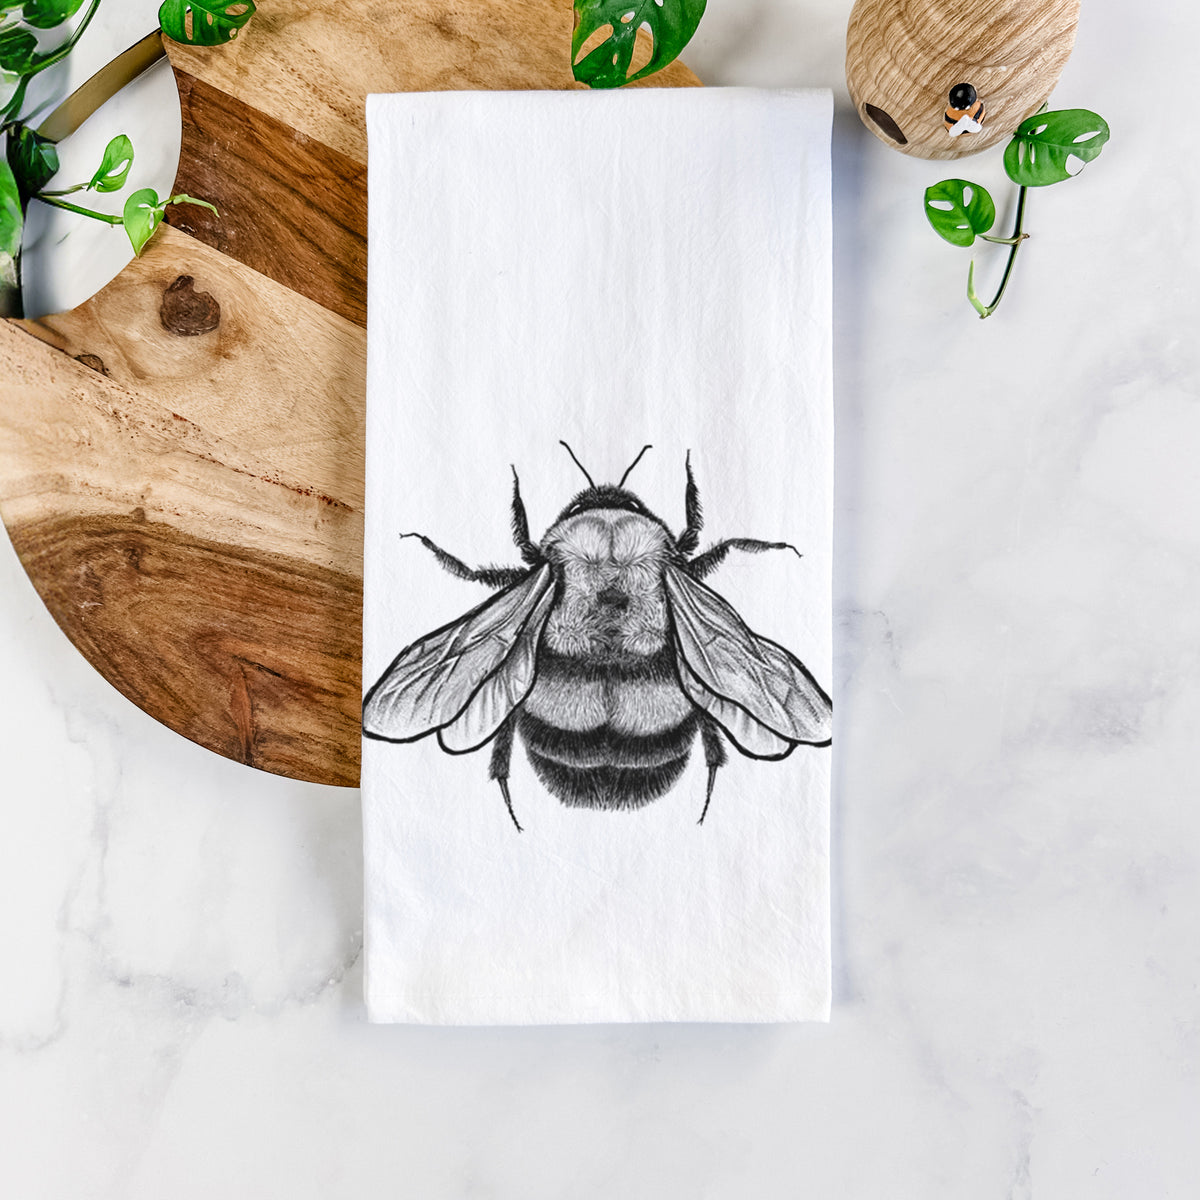 Bombus Affinis - Rusty-Patched Bumble Bee Tea Towel